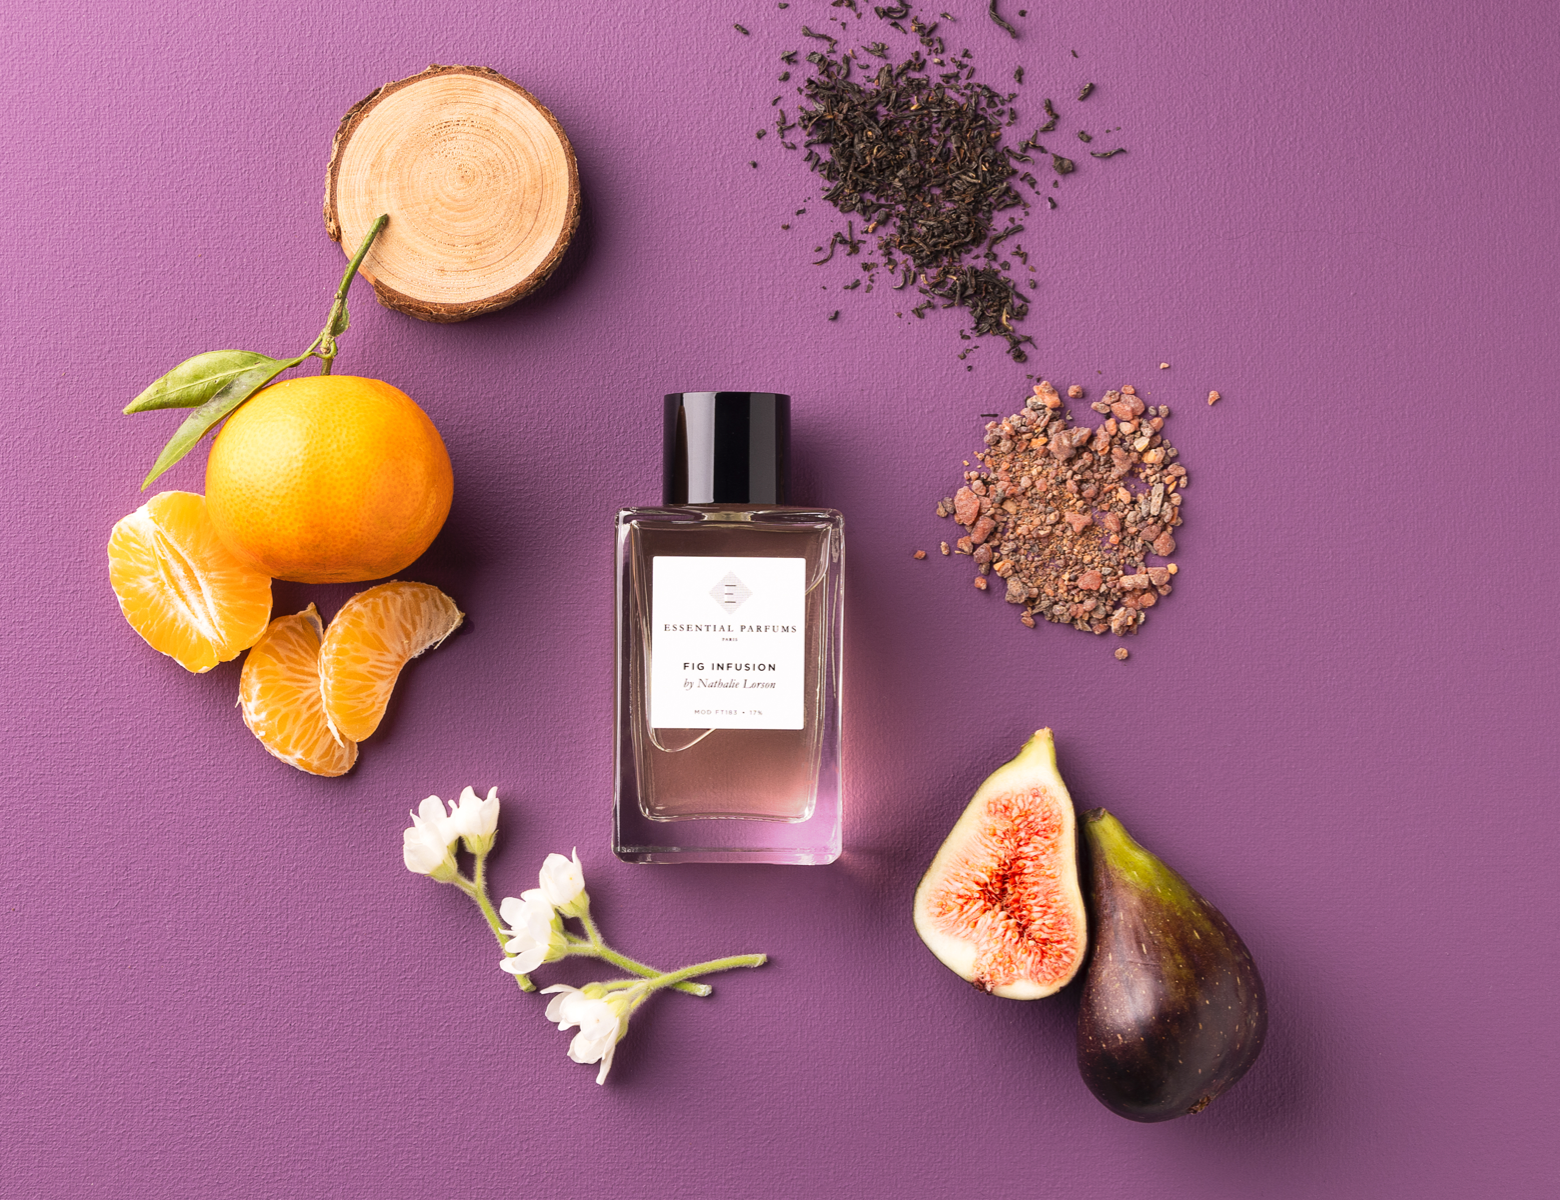 fig infusion by nathalie lorson